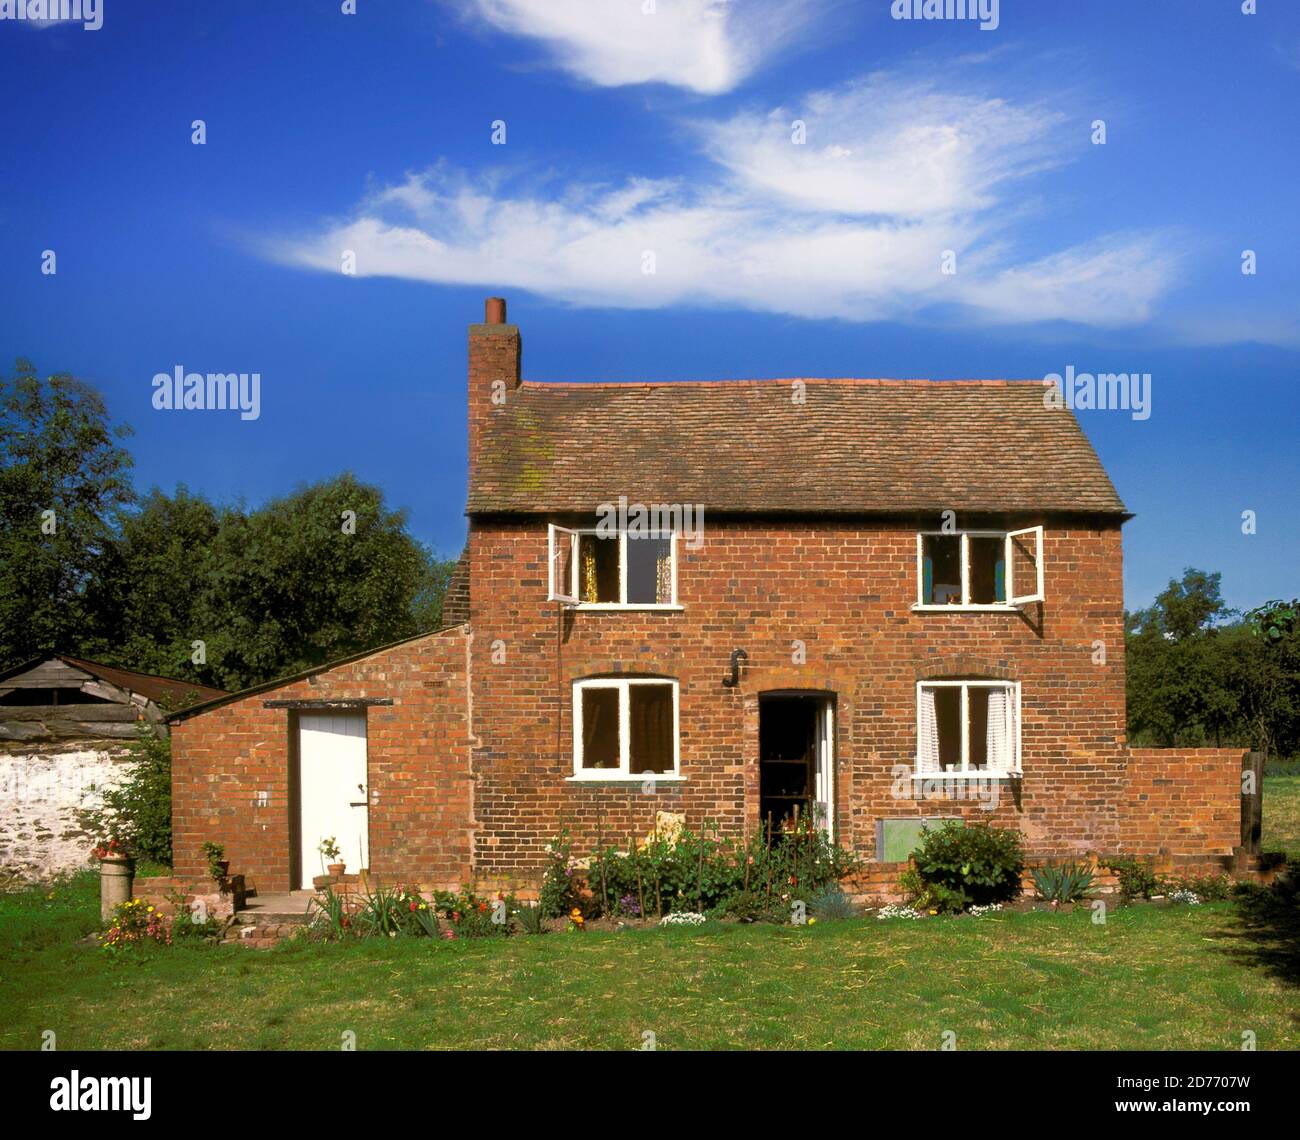 Vintage photography of a quintessential country cottage in the Wyre Forest, Shropshire, England.  Summer 1976. Stock Photo